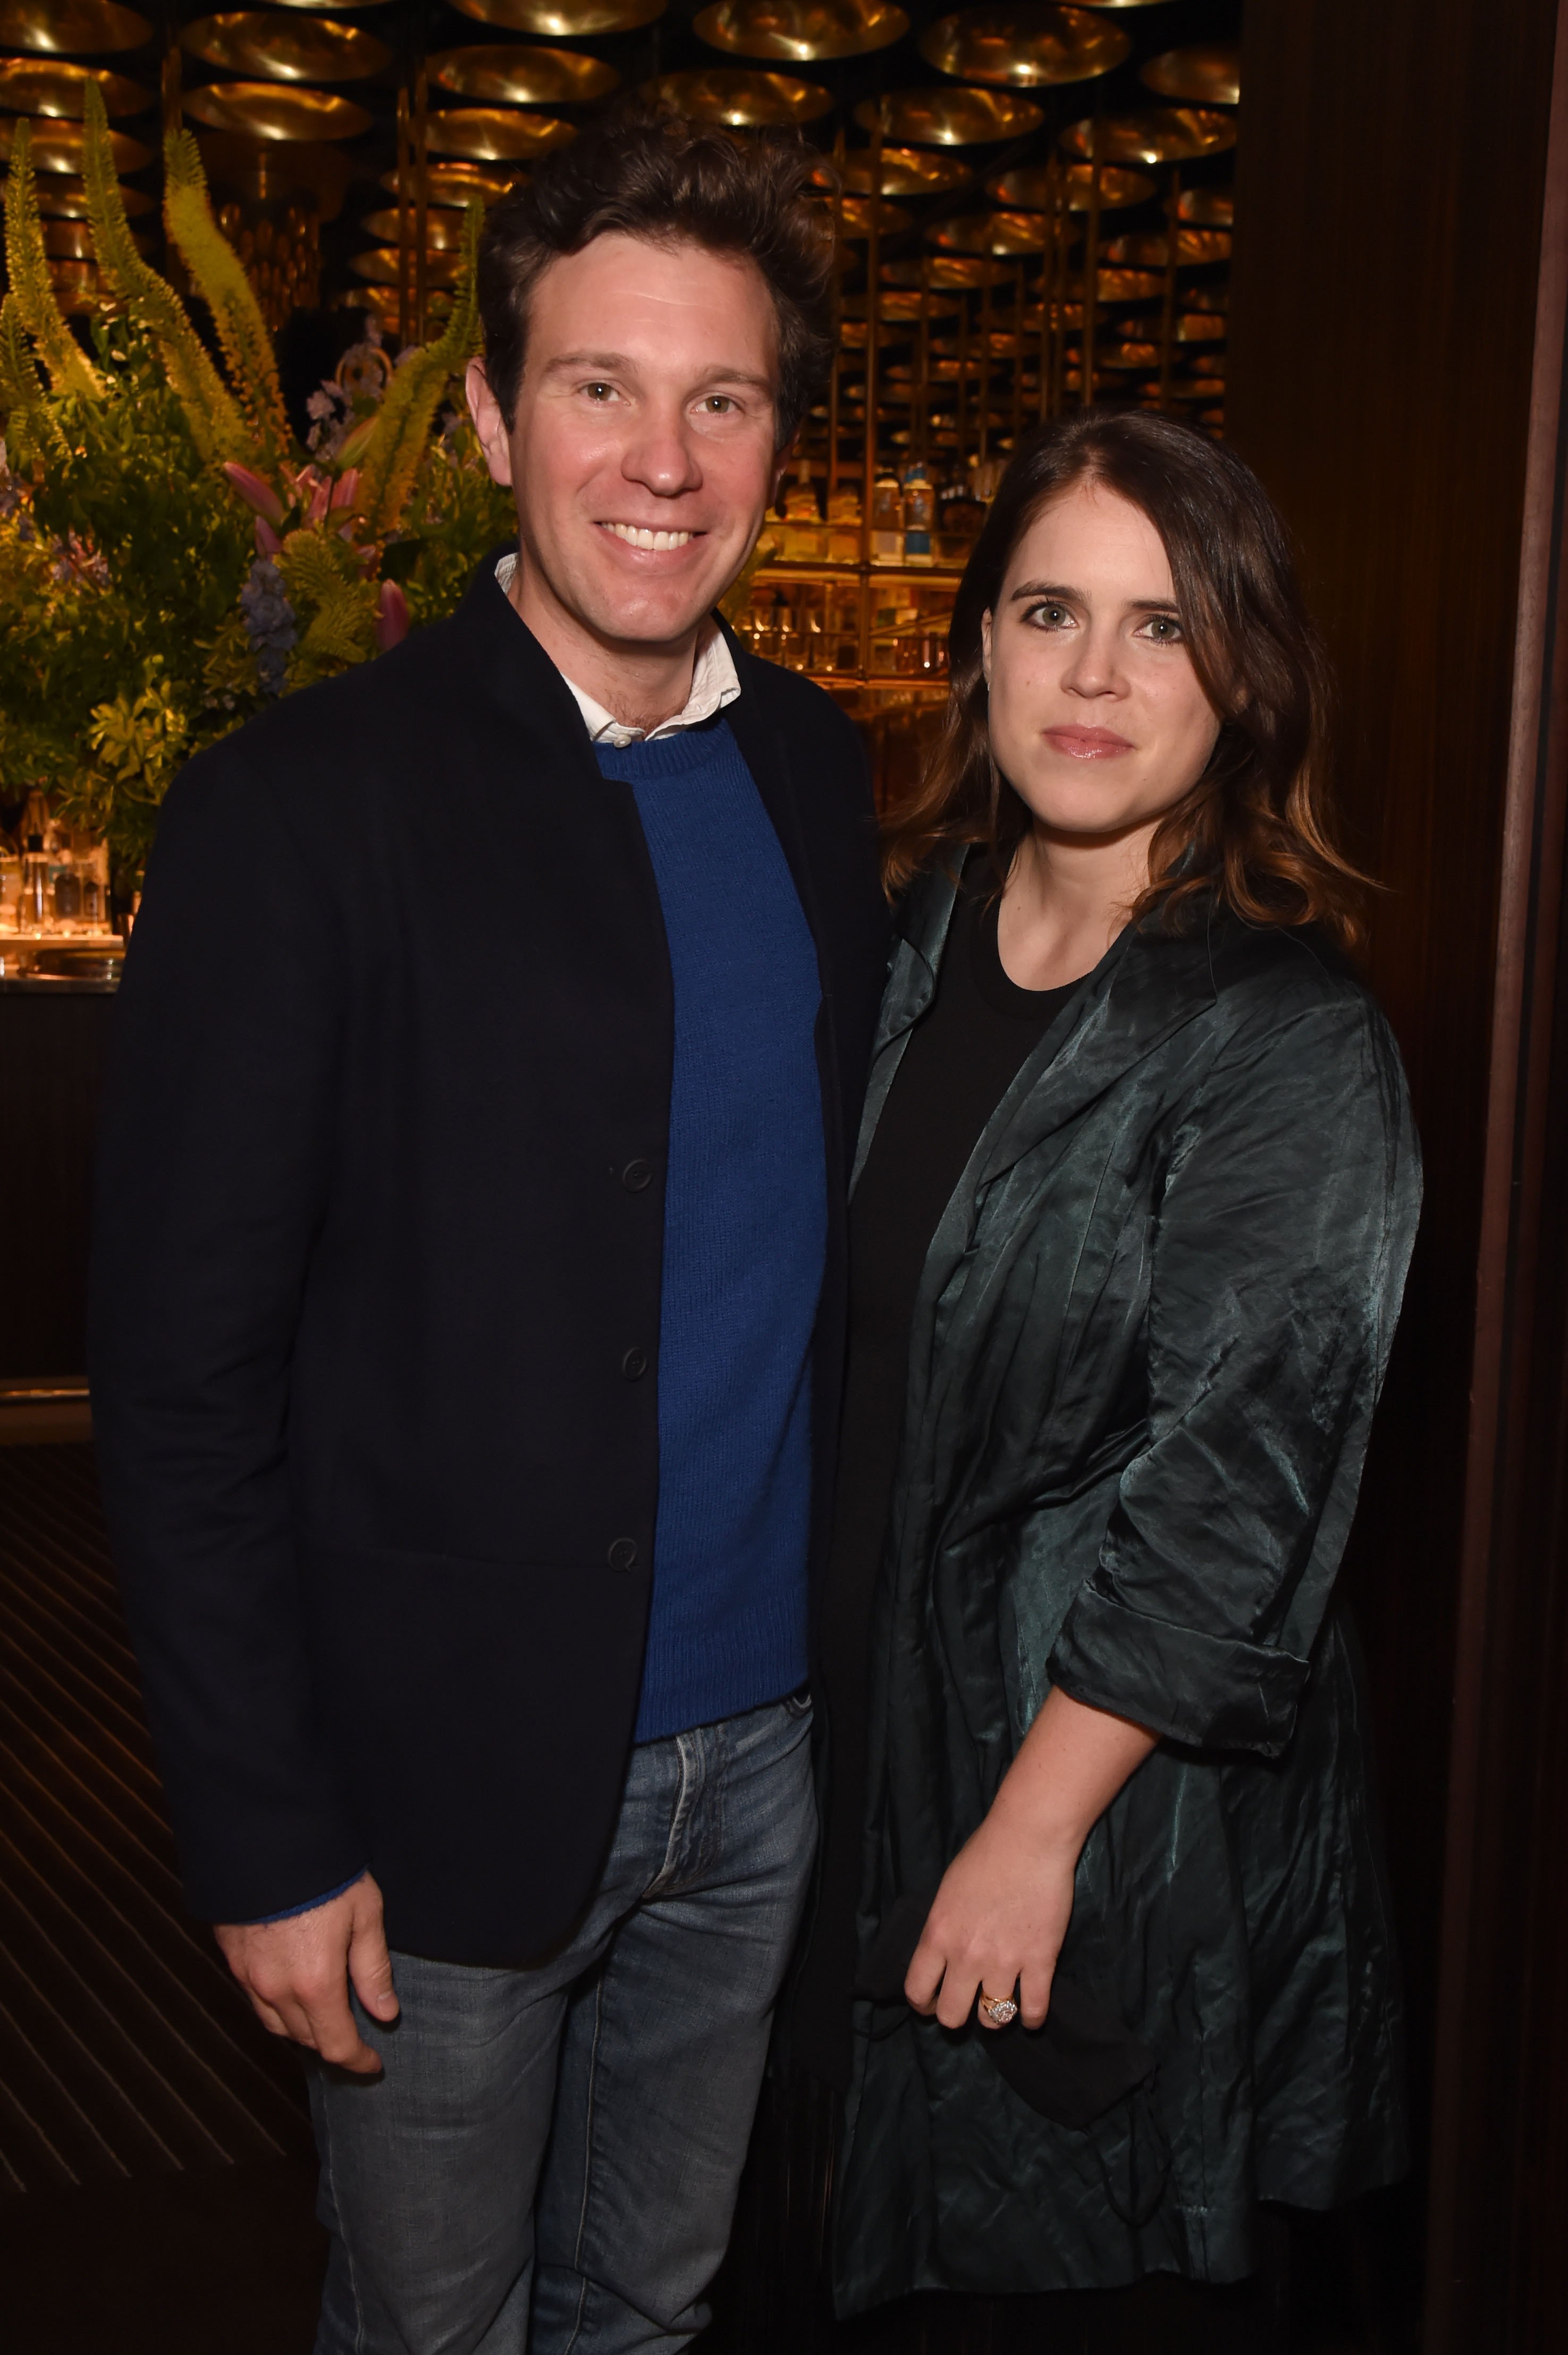 Jack Brooksbank and Princess Eugenie attend an exclusive dinner hosted by Poppy Jamie to celebrate the launch of her first book "Happy Not Perfect" at Isabel on June 22, 2021 in London, England | Source: Getty Images